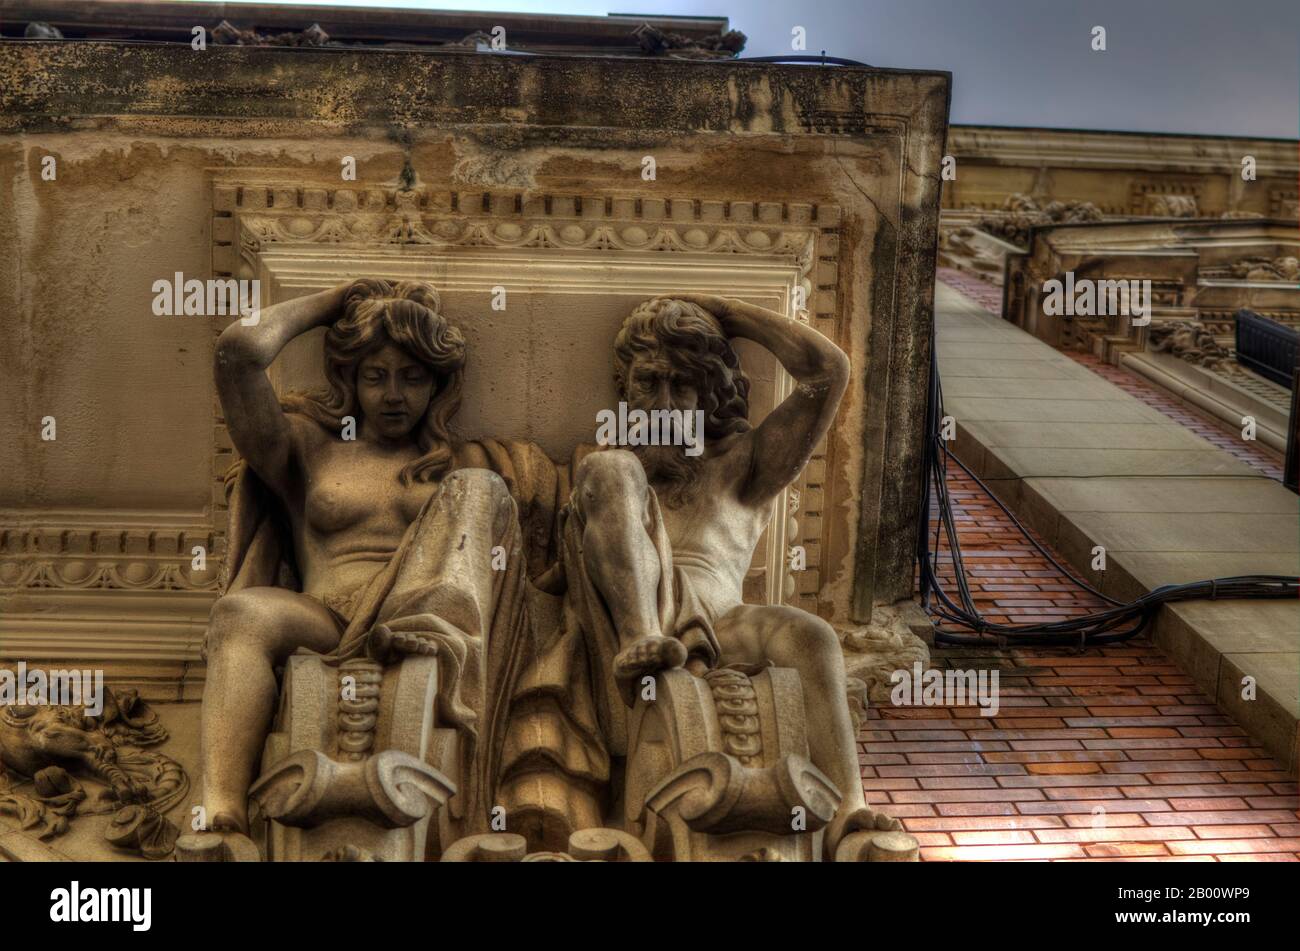 Atlas and Caryatid supporting a balcony in Seville, Andalusia, Spain. Detail. Stock Photo